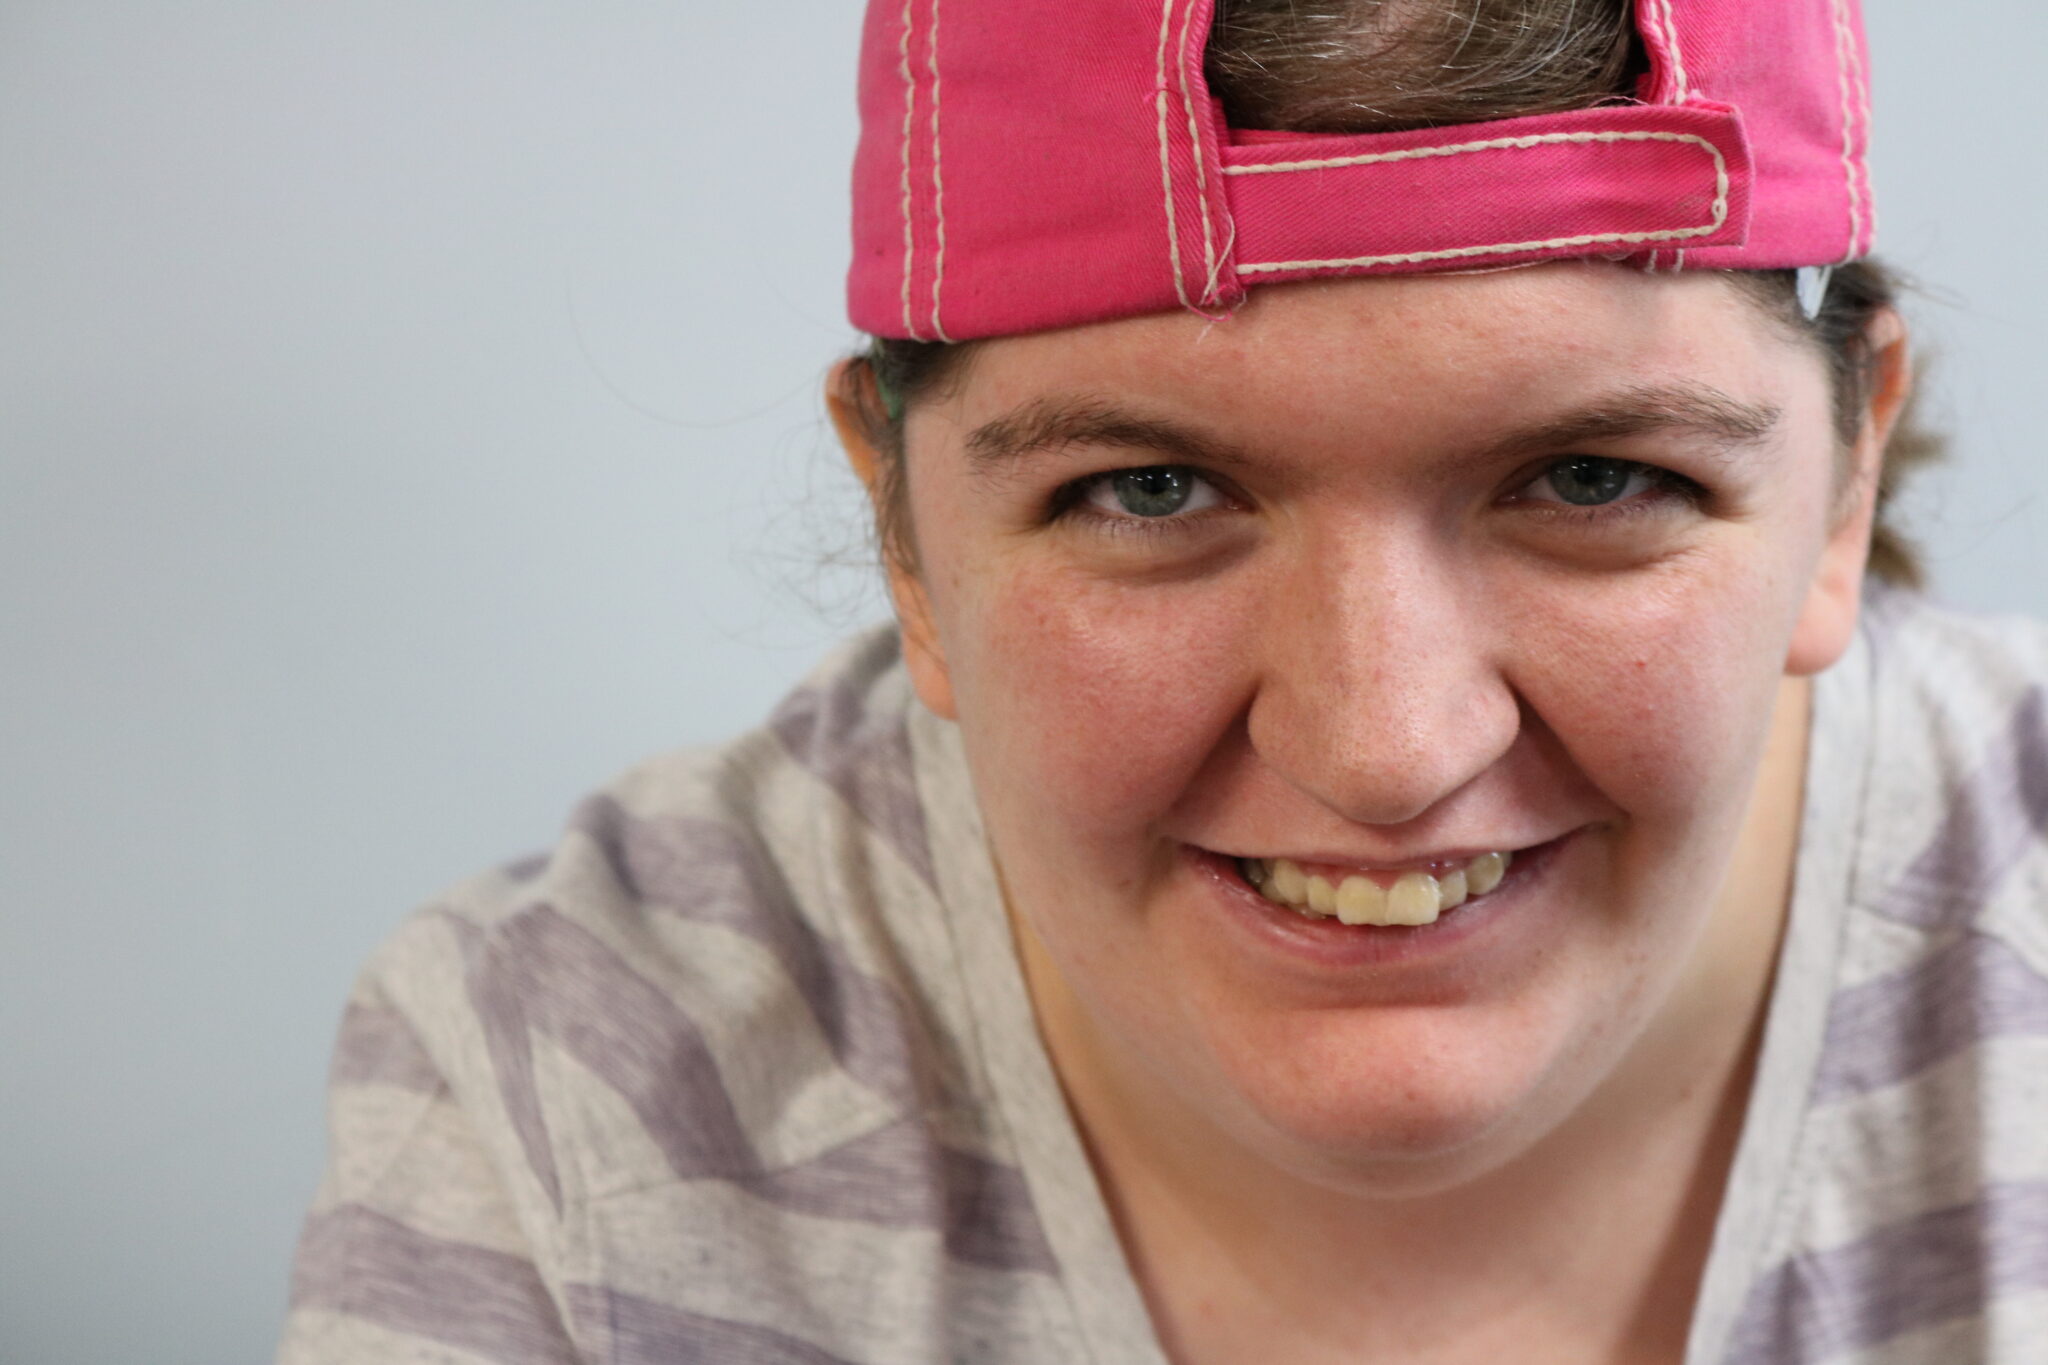 A female student wearing a pink ballcap being worn backwards.